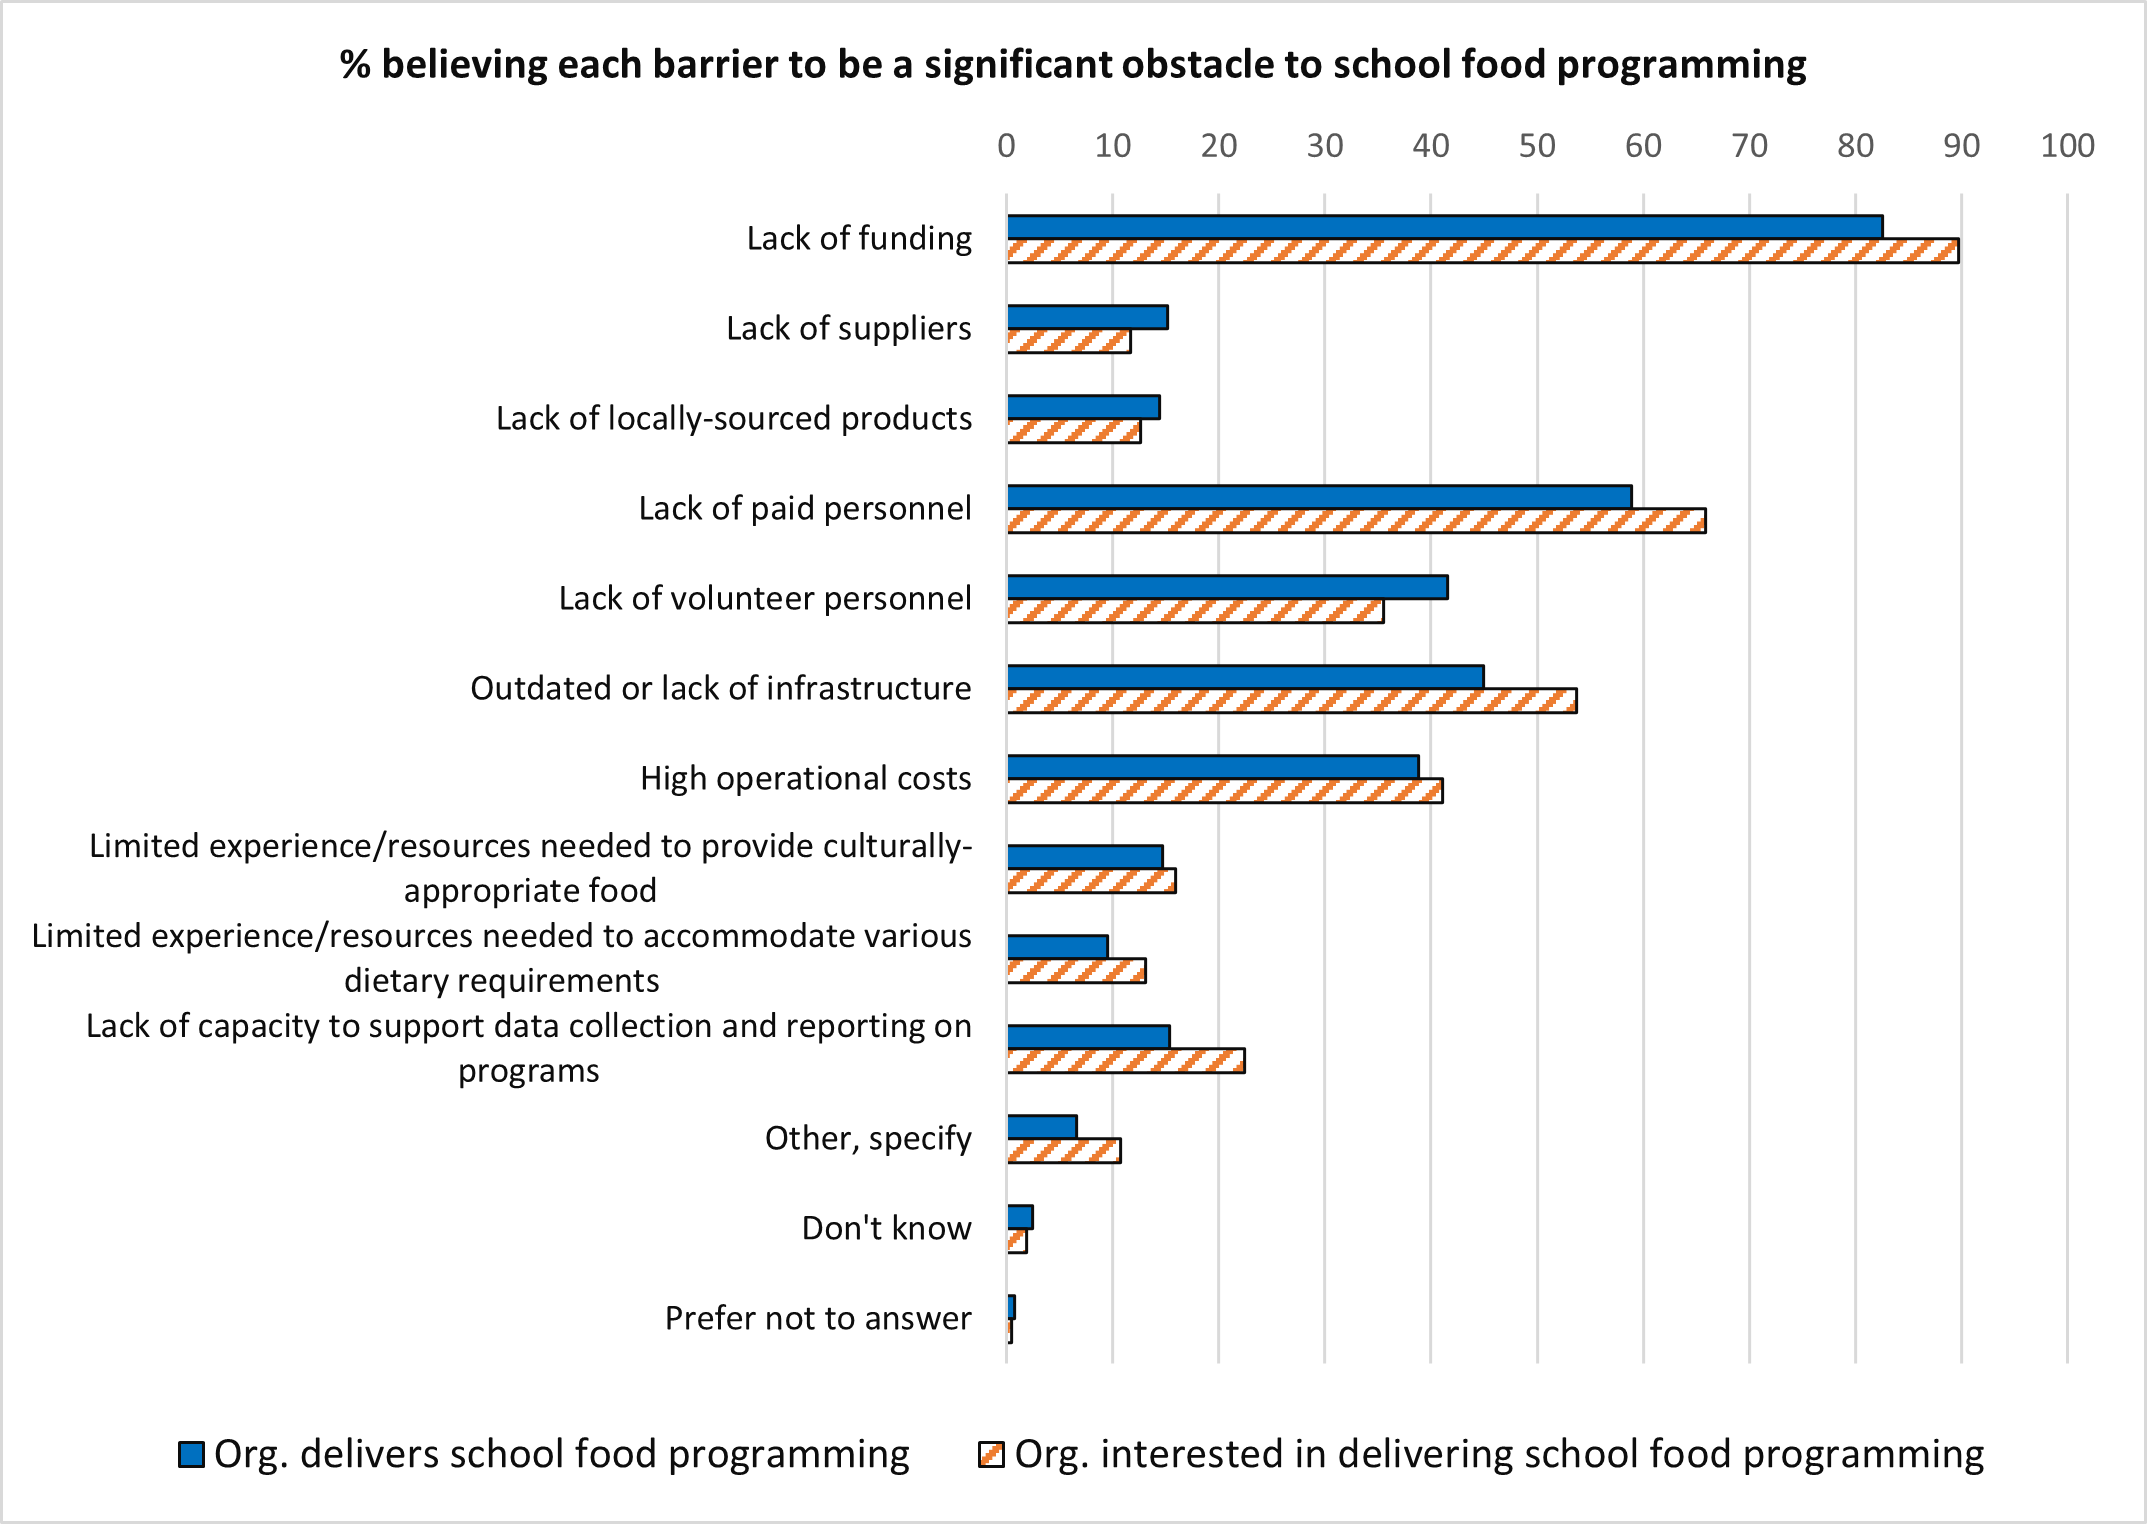 A bar chart of the percent believing each barrier to be a significant obstacle to school food programming. Text version below.